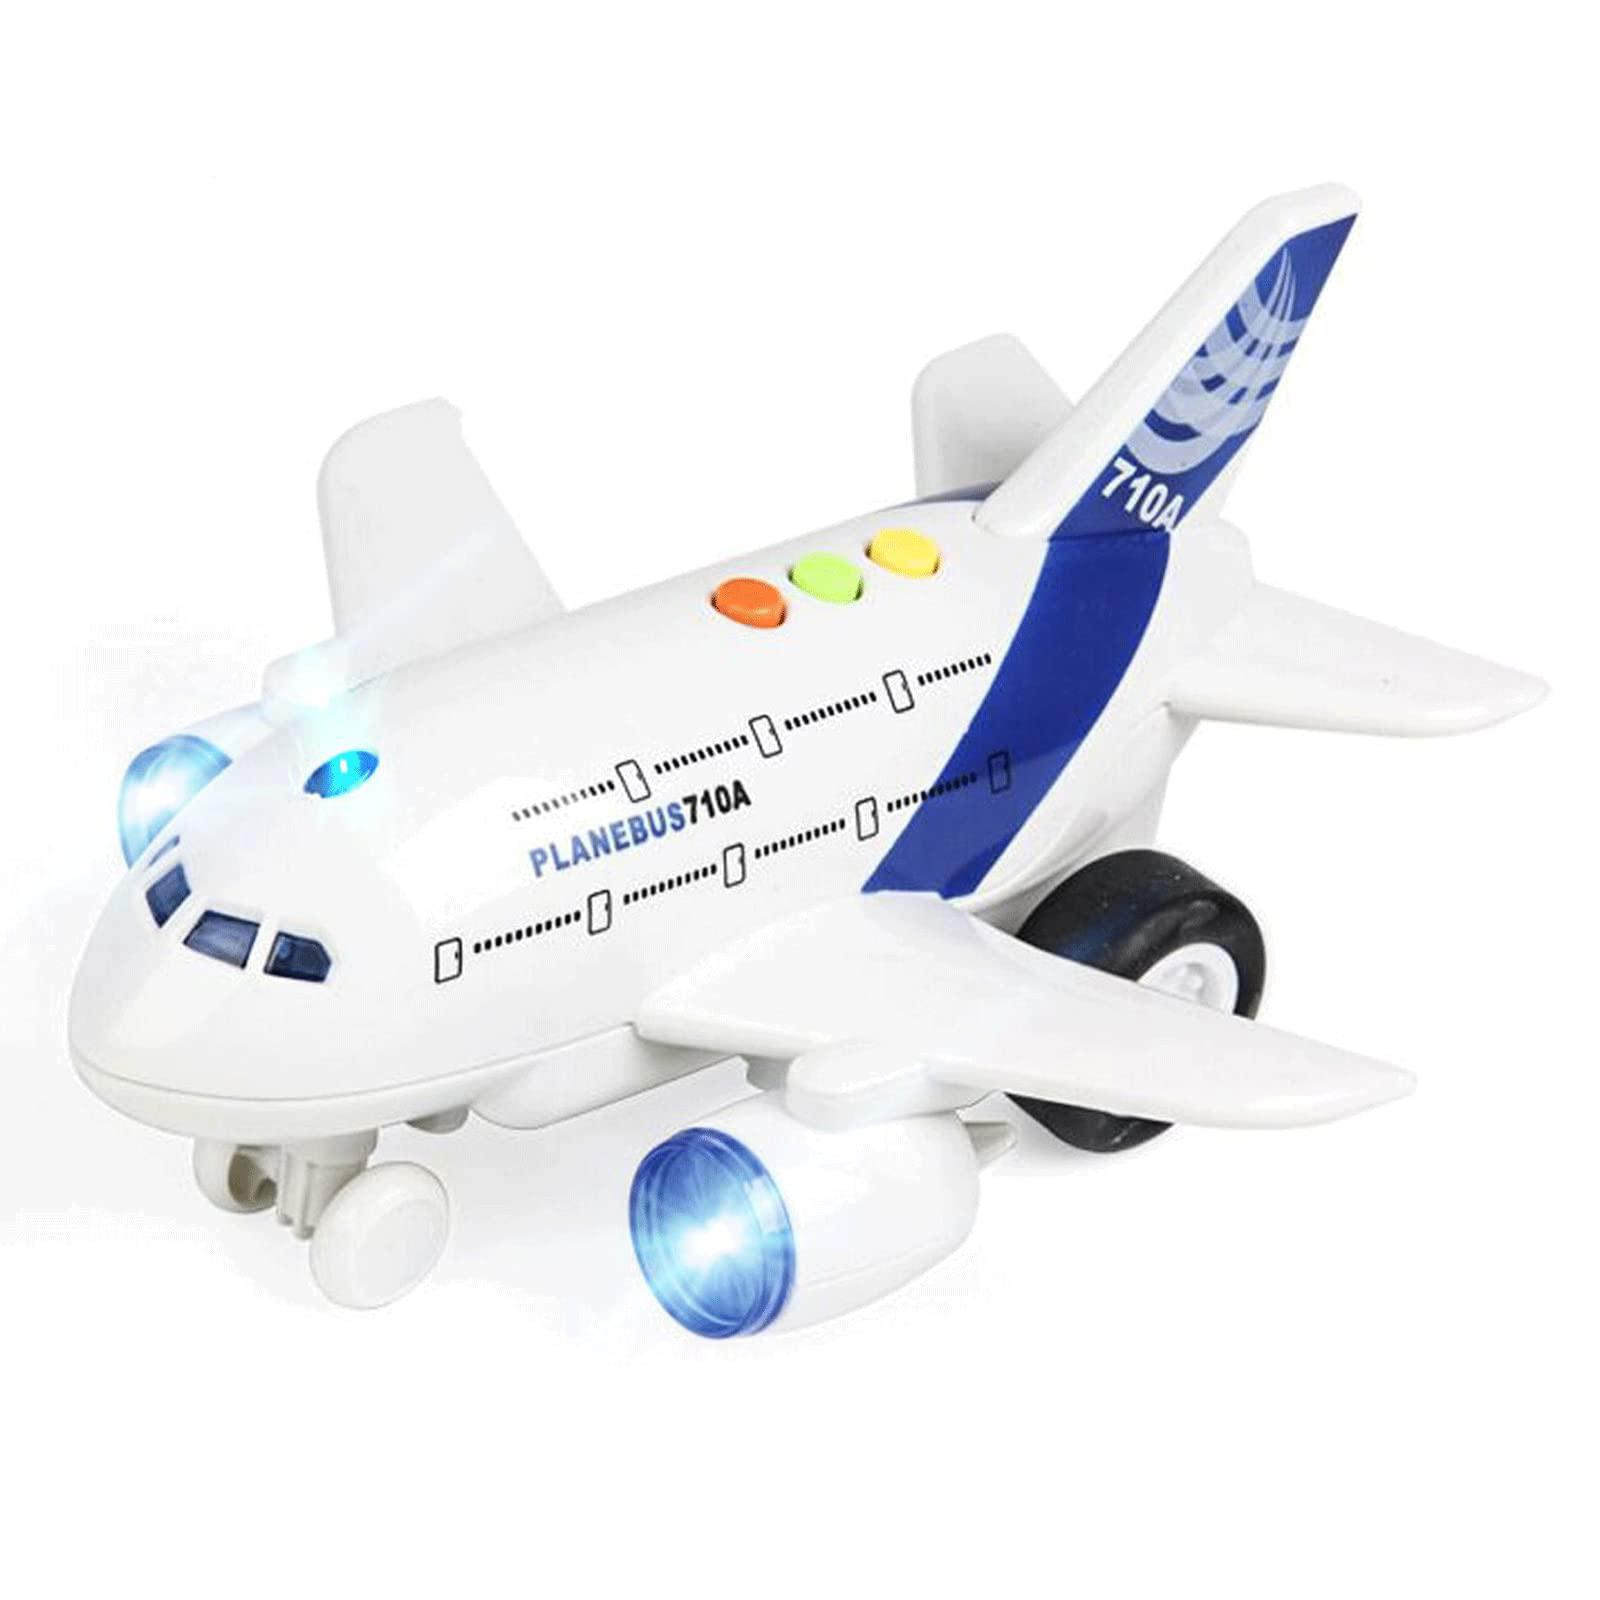 Yeam airplane toys for toddlers,friction powered toy plane for kids,1:200 scale aircraft with flashing lights and sounds for boys 